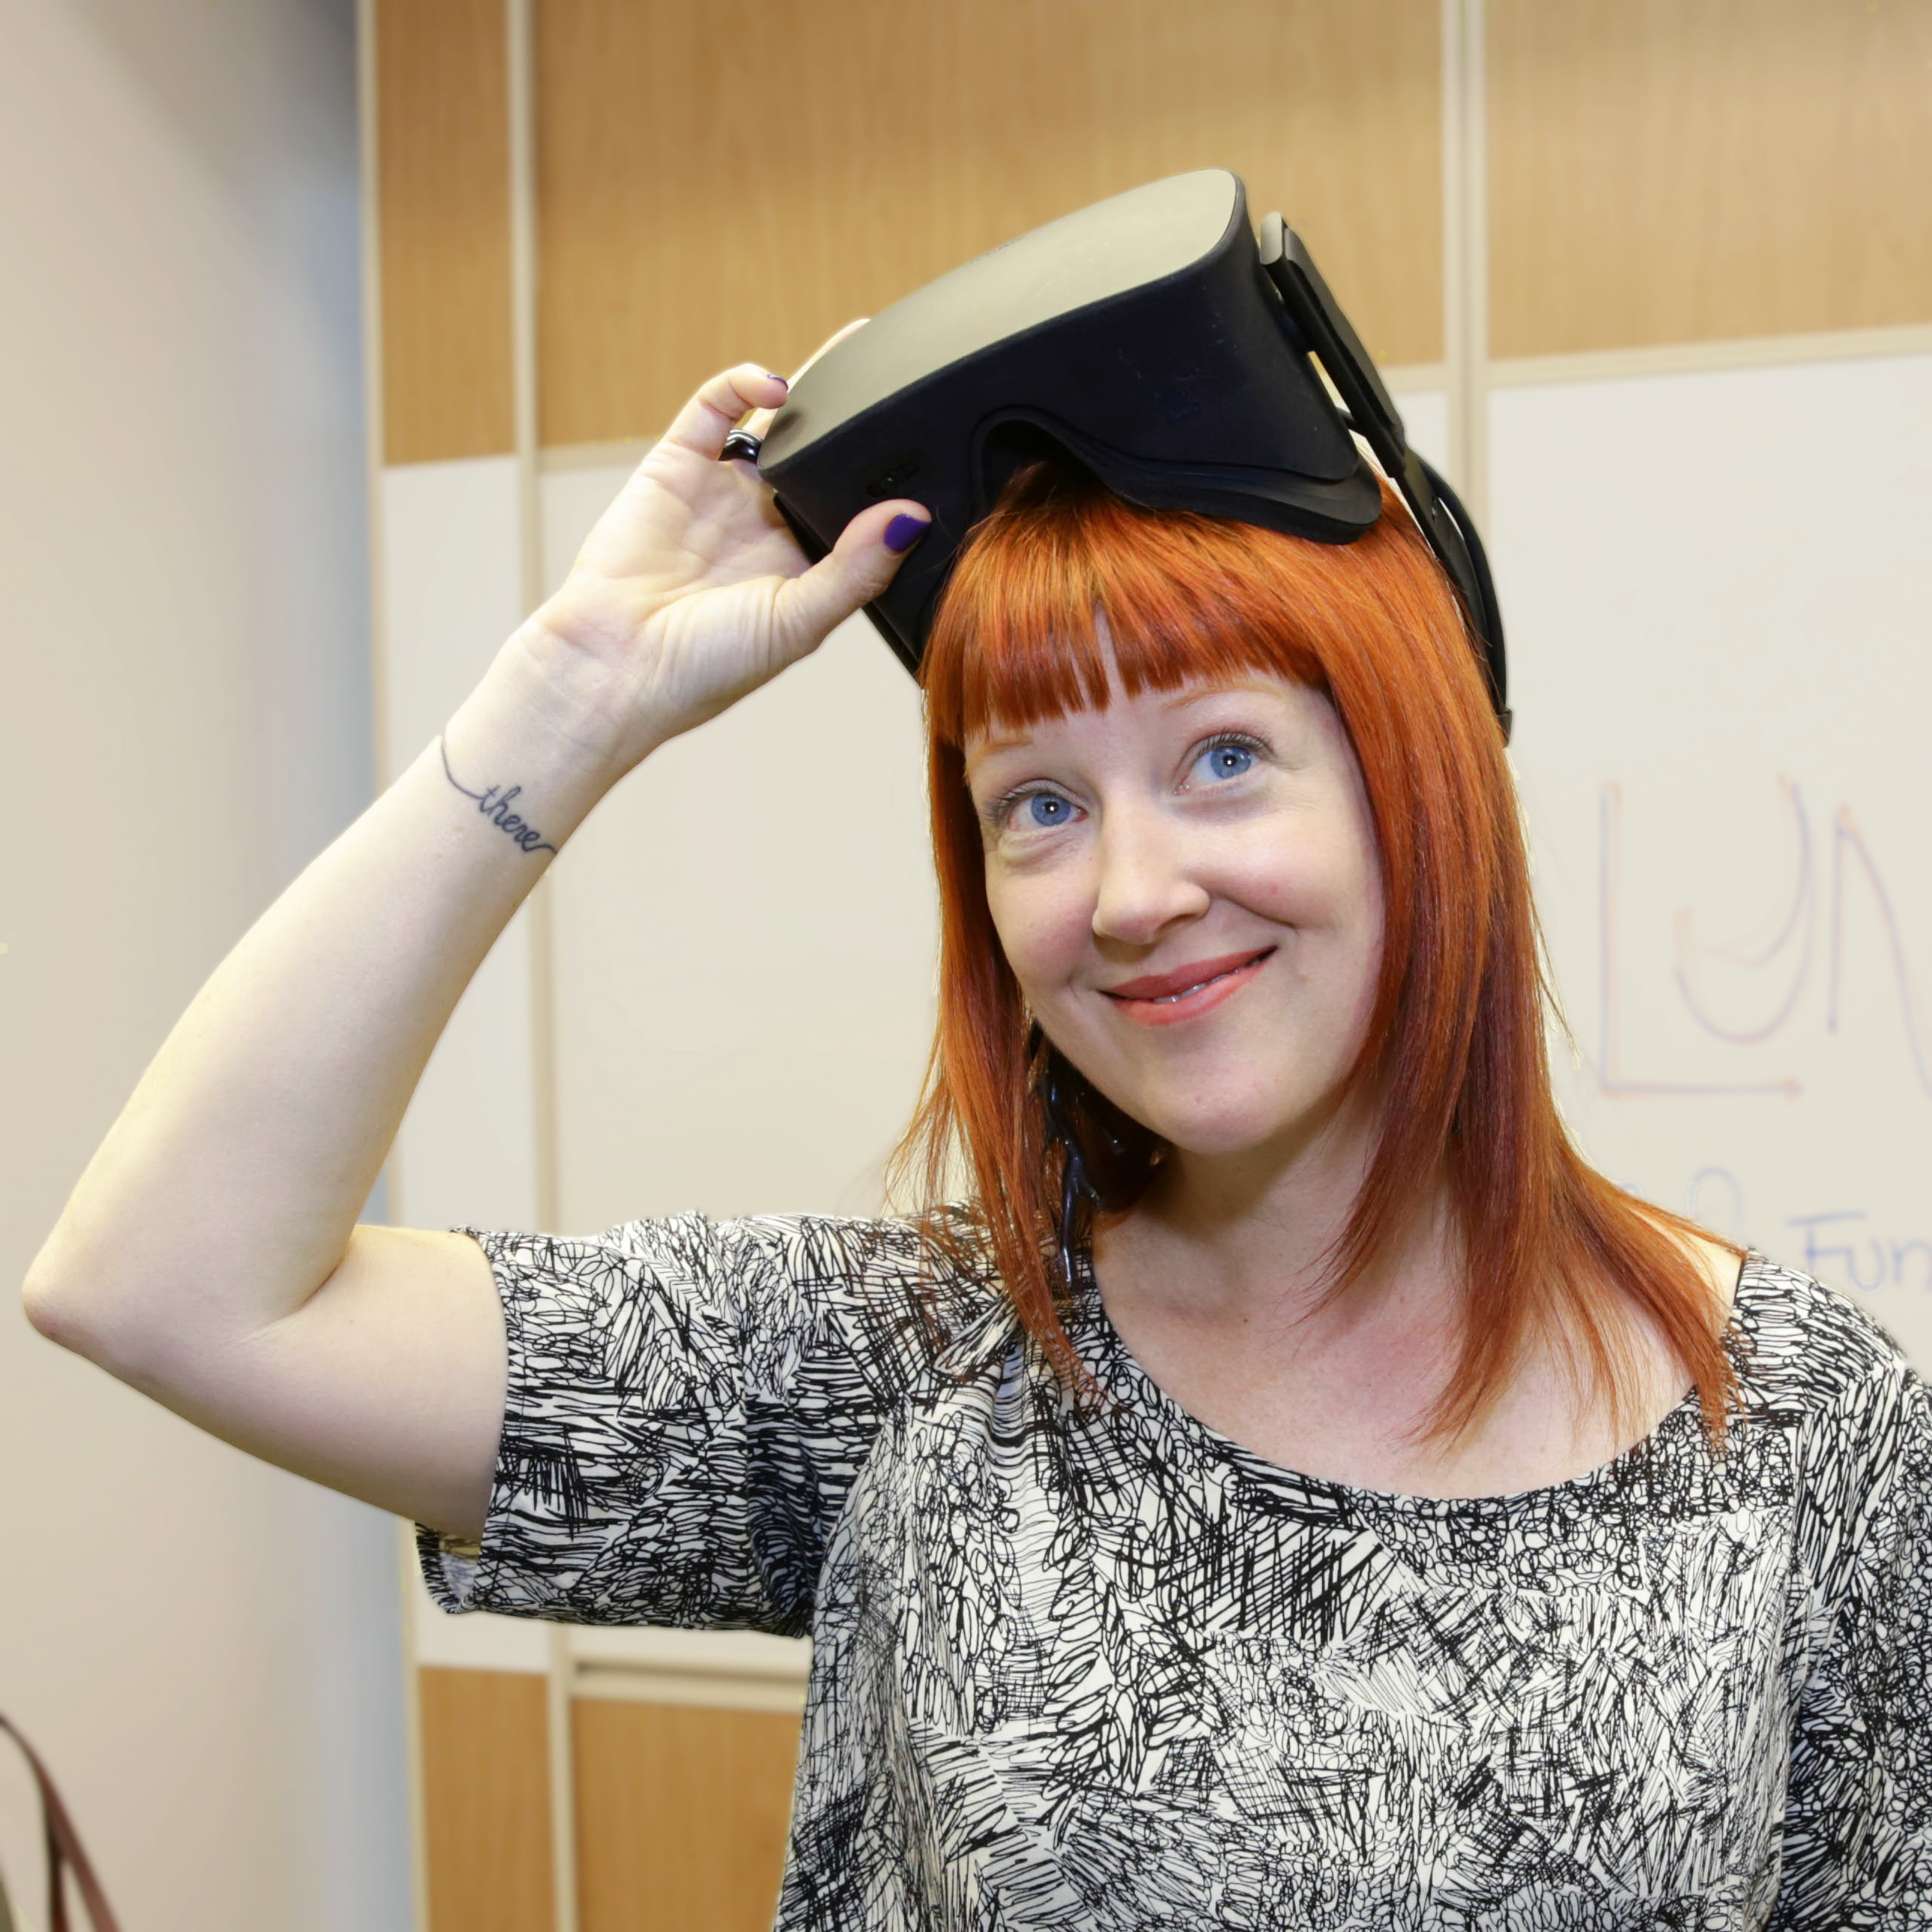 Video Game Developer Robin Hunicke with a VR Headset On Her Head